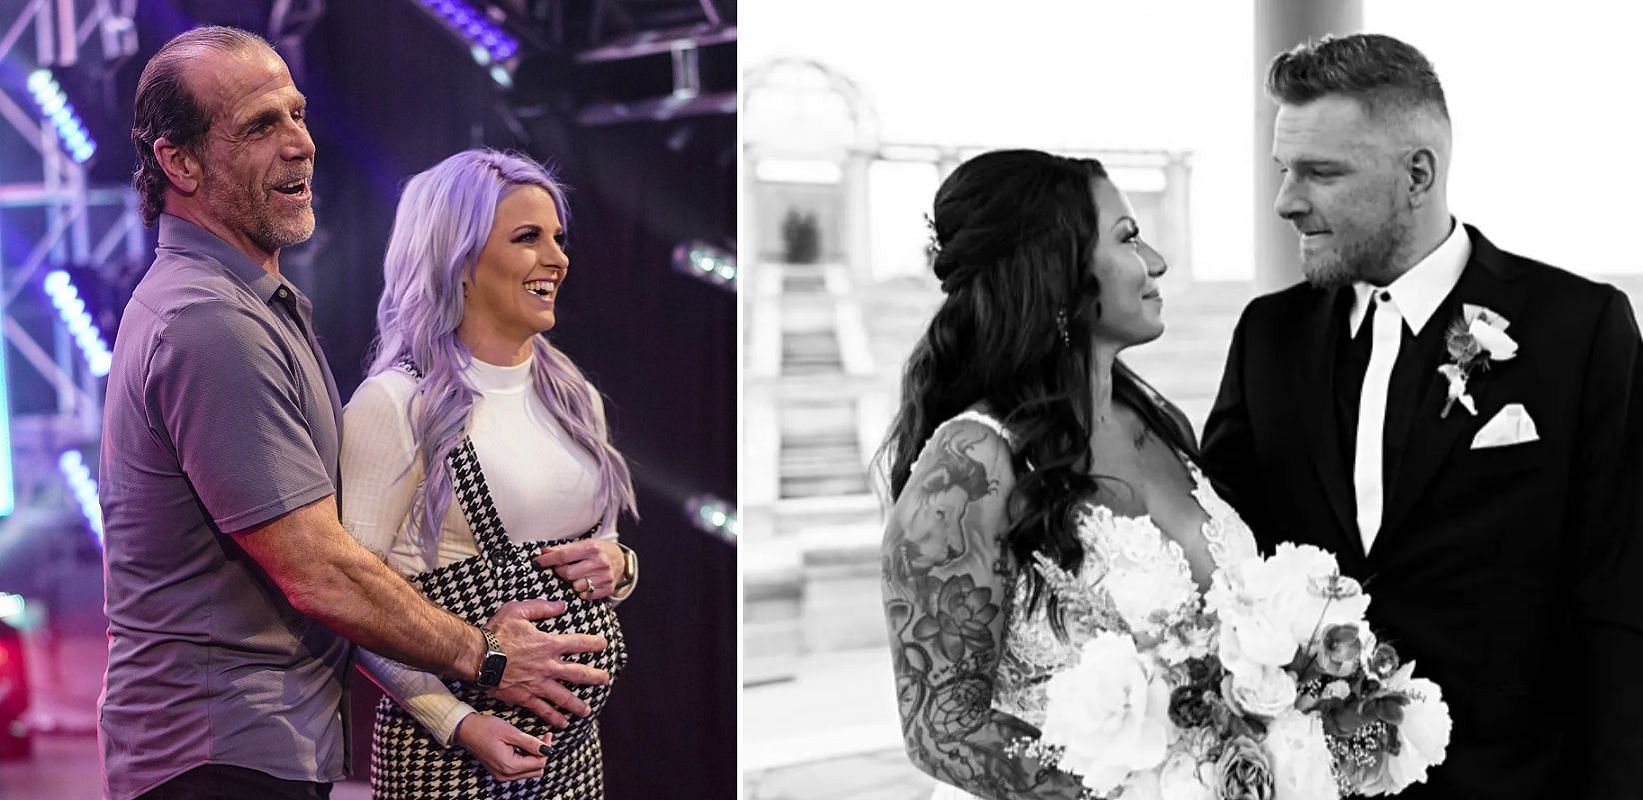 Several WWE Superstars are making the journey into parenthood